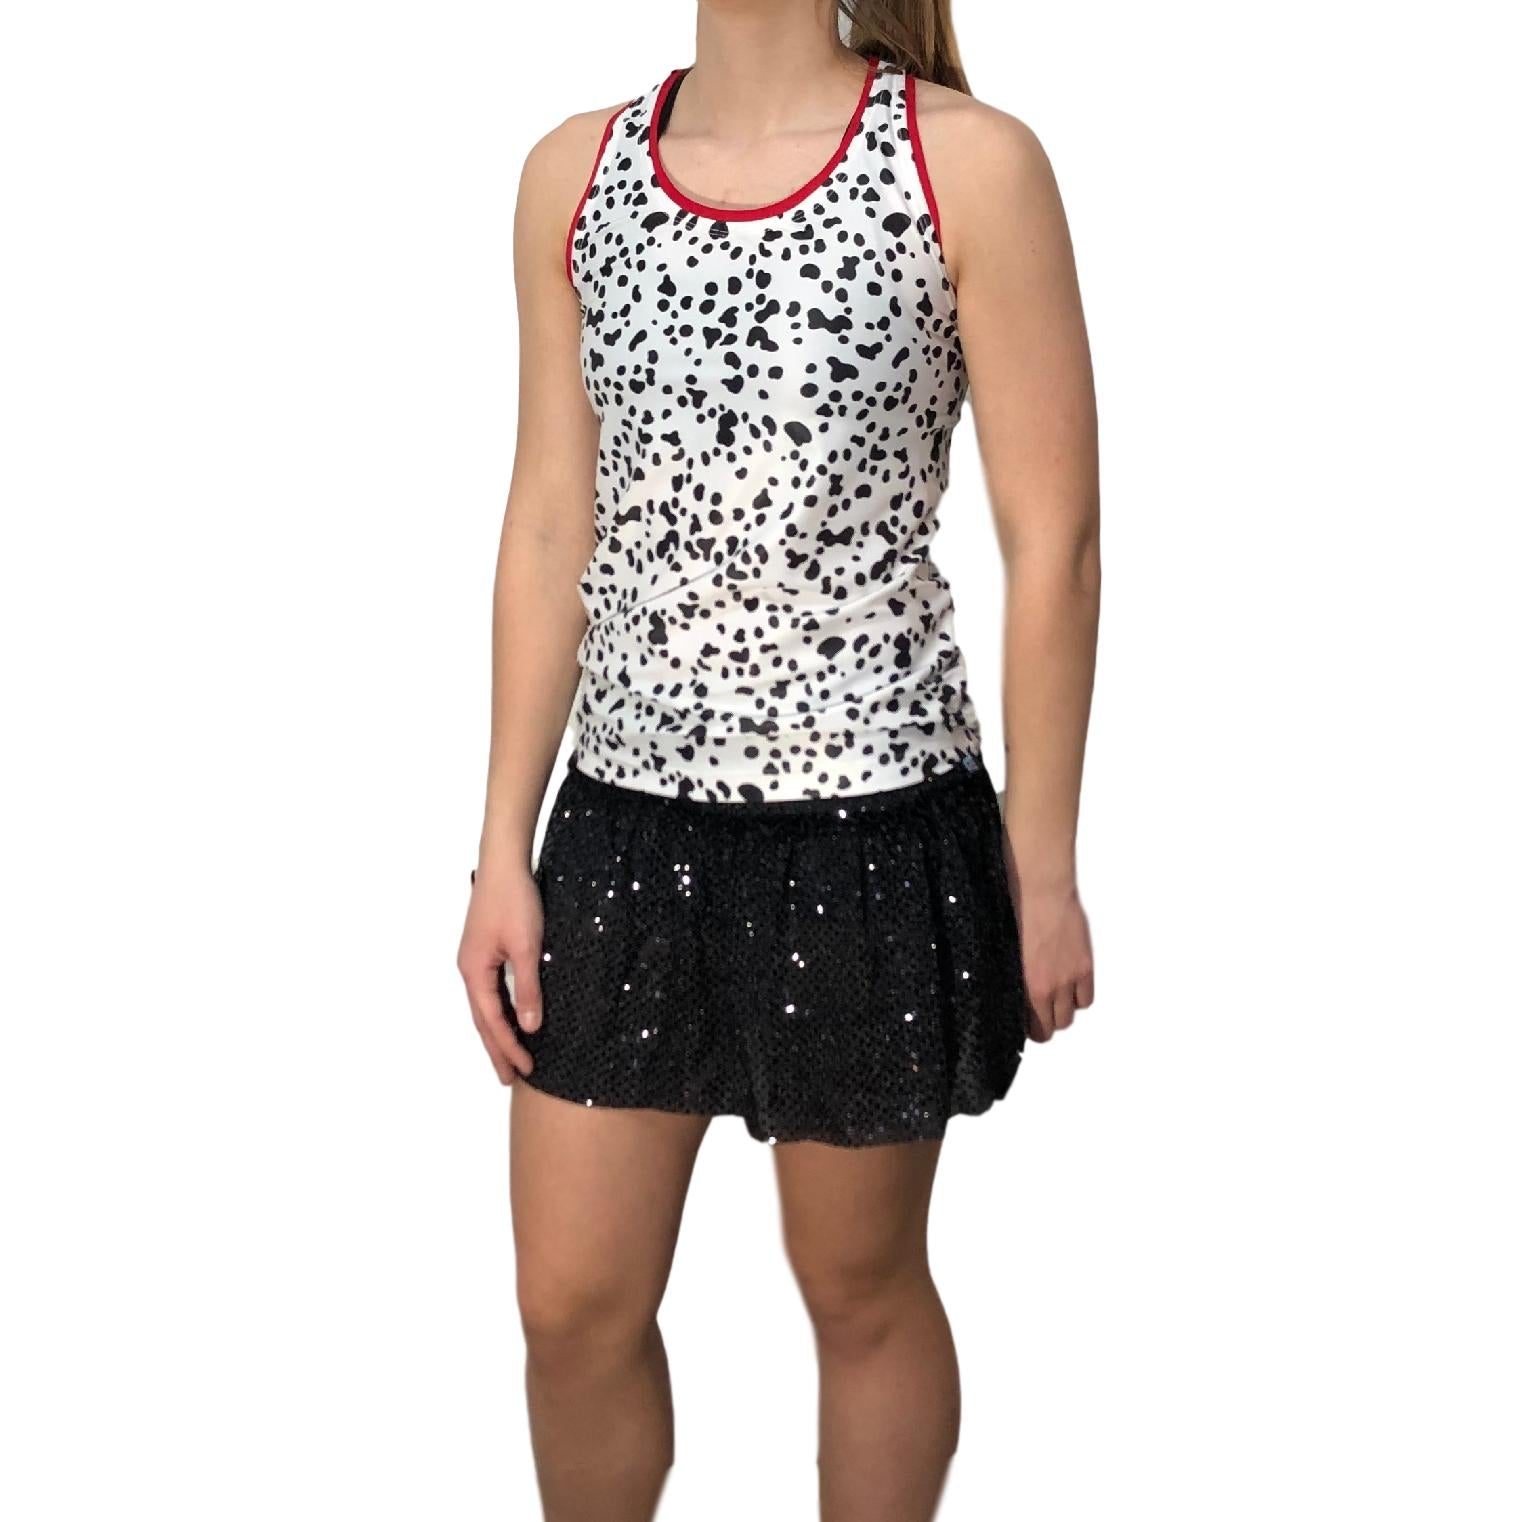 Dalmatians Inspired Costume- Racerback And Skirt - Rock City Skirts